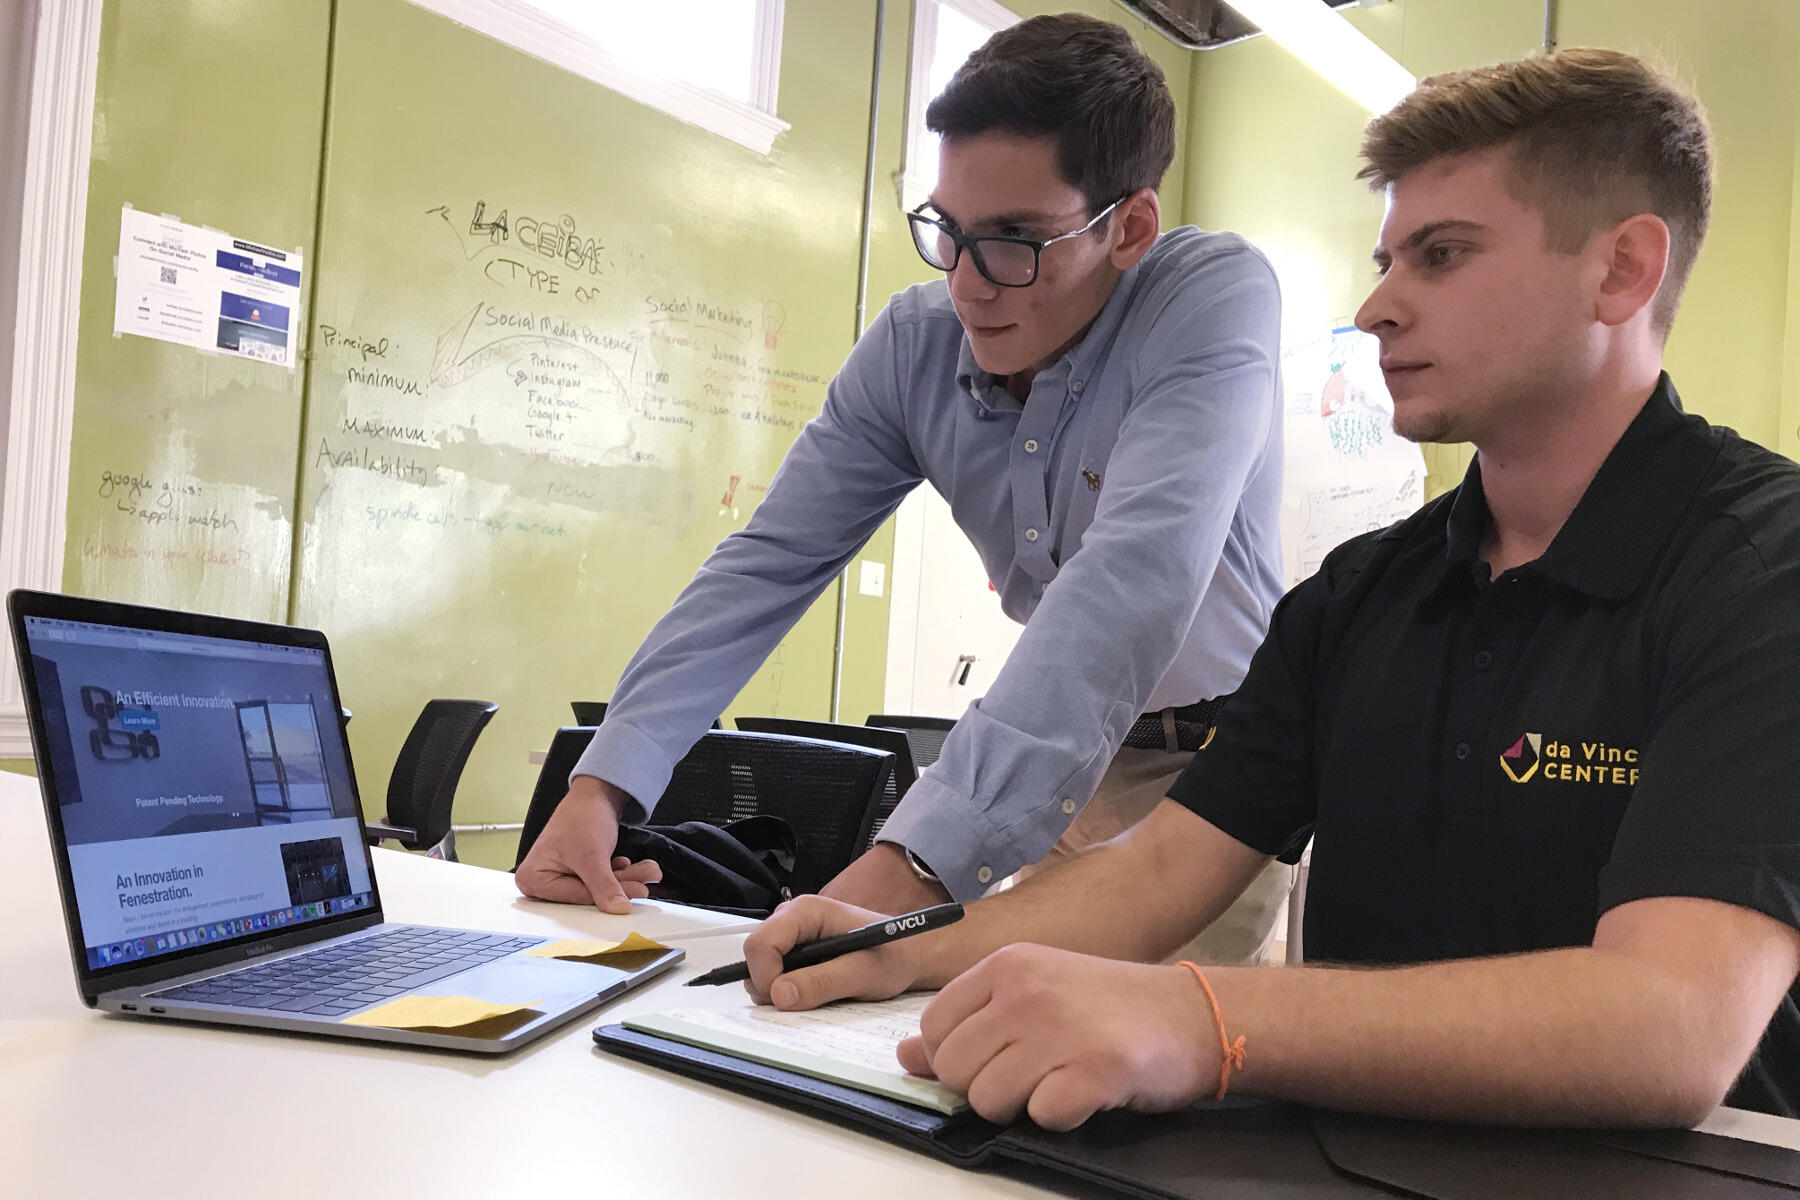 Neil Hailey, a junior mechanical engineering major, and Matthew Sozio, a first-year Master of Product Innovation student, have formed Efficient Innovations LLC to develop their French Slide invention and try to bring it to market.